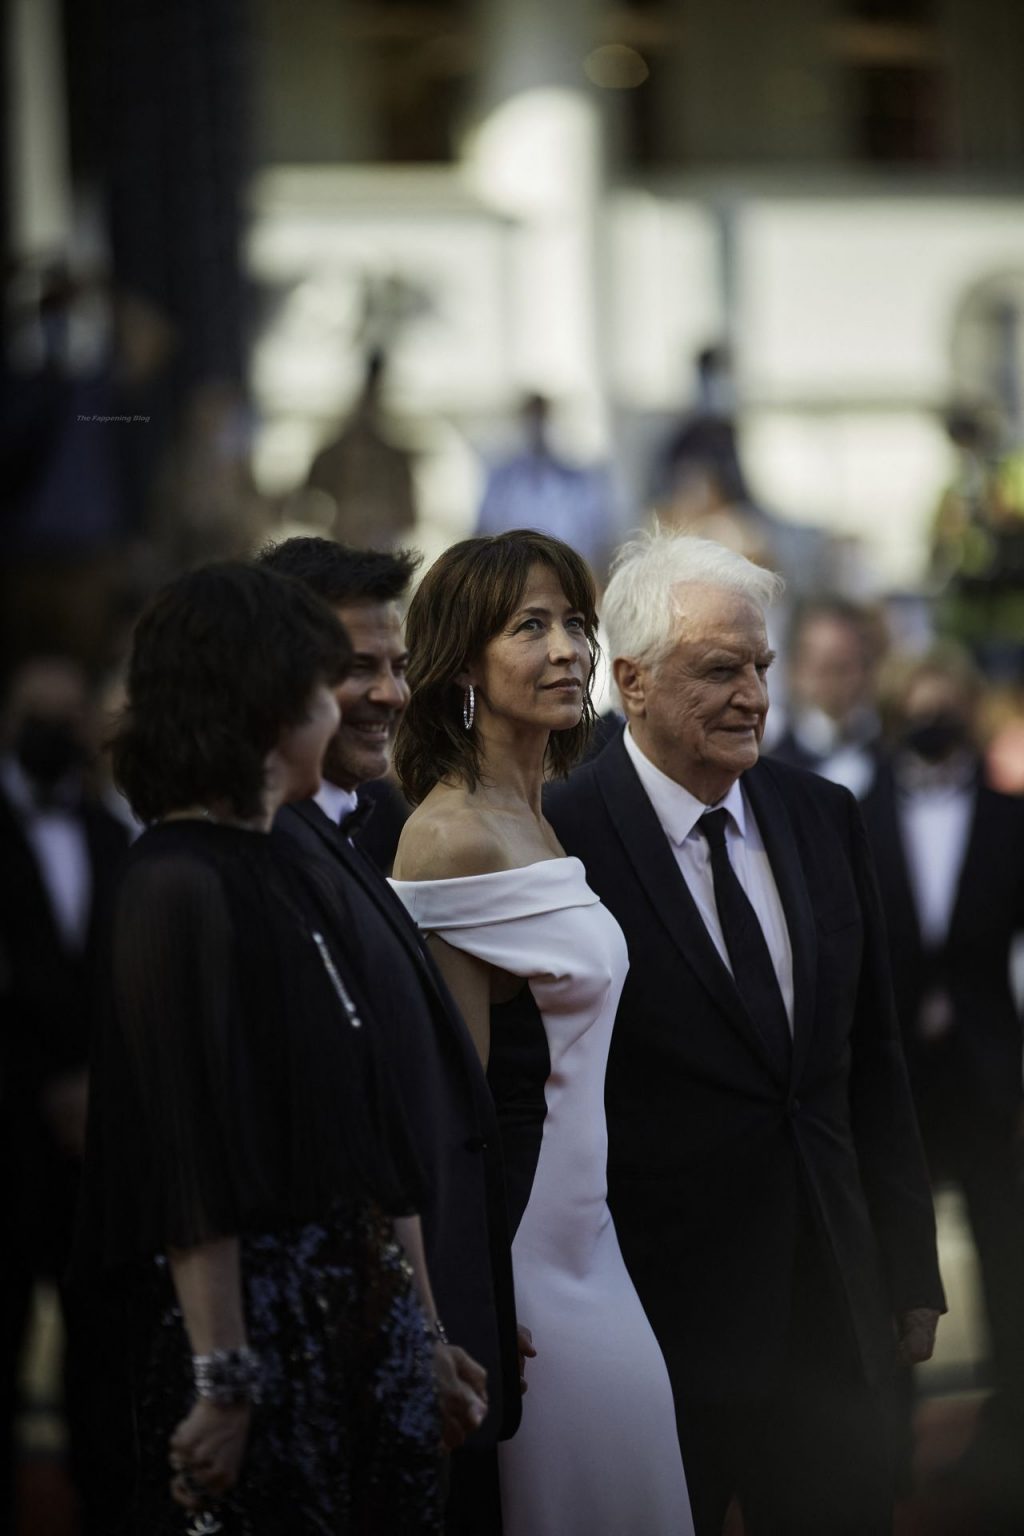 Sophie Marceau Shows Off Her Pokies at the 74th Cannes Film Festival (138 Photos)